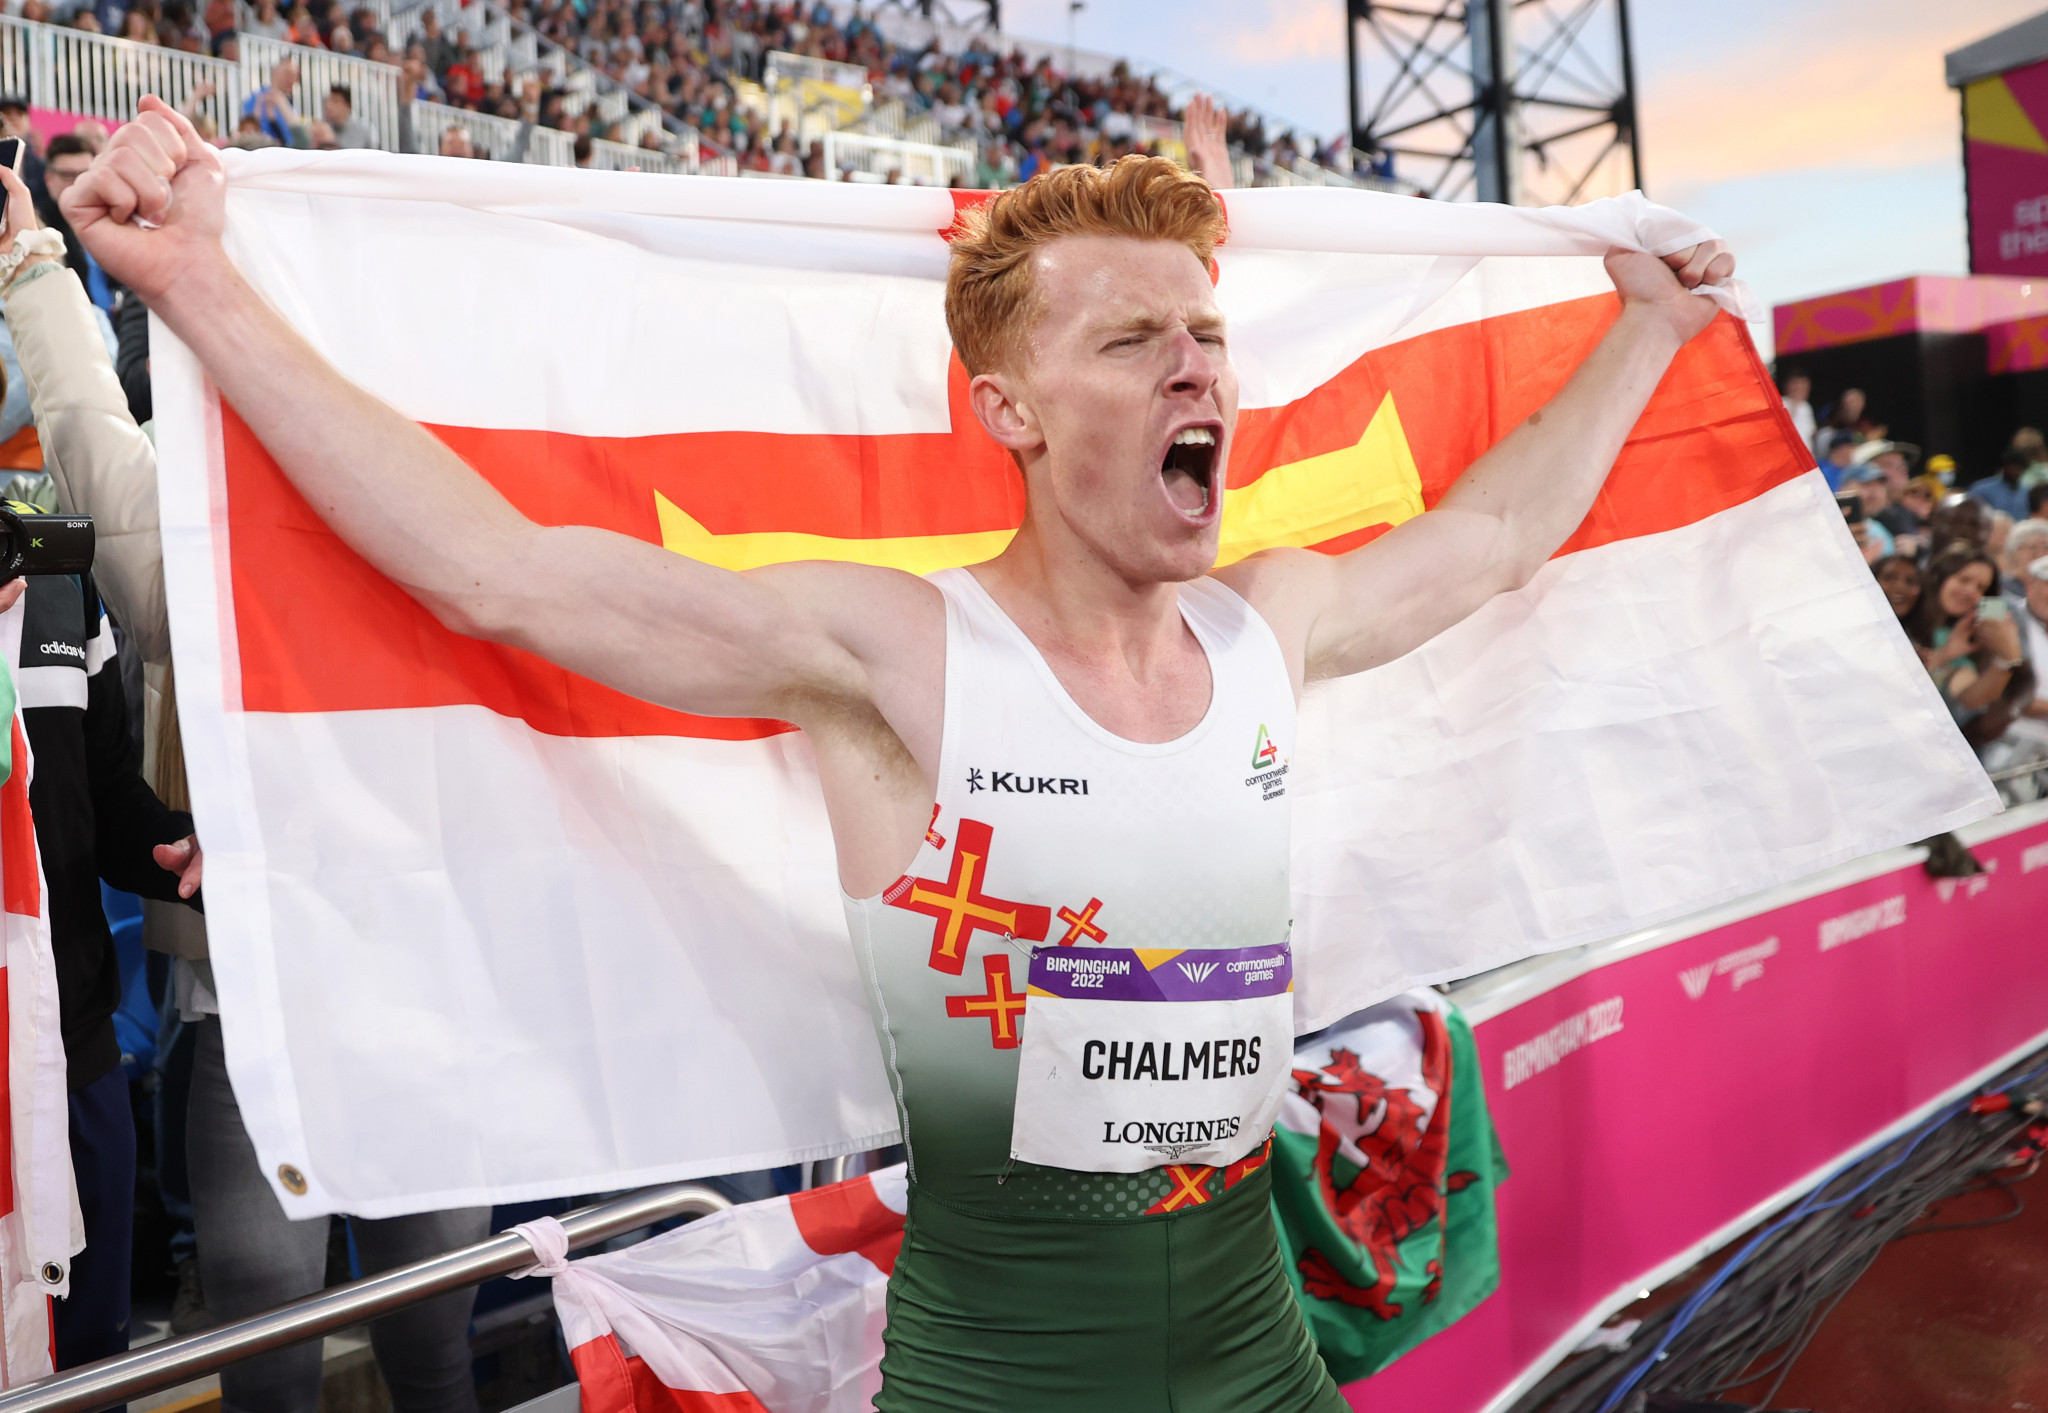 Alistair Chalmers won Guernsey's first Commonwealth Games medal on the track at Birmingham 2022 after winning Island Games gold in 2017 ©Getty Images